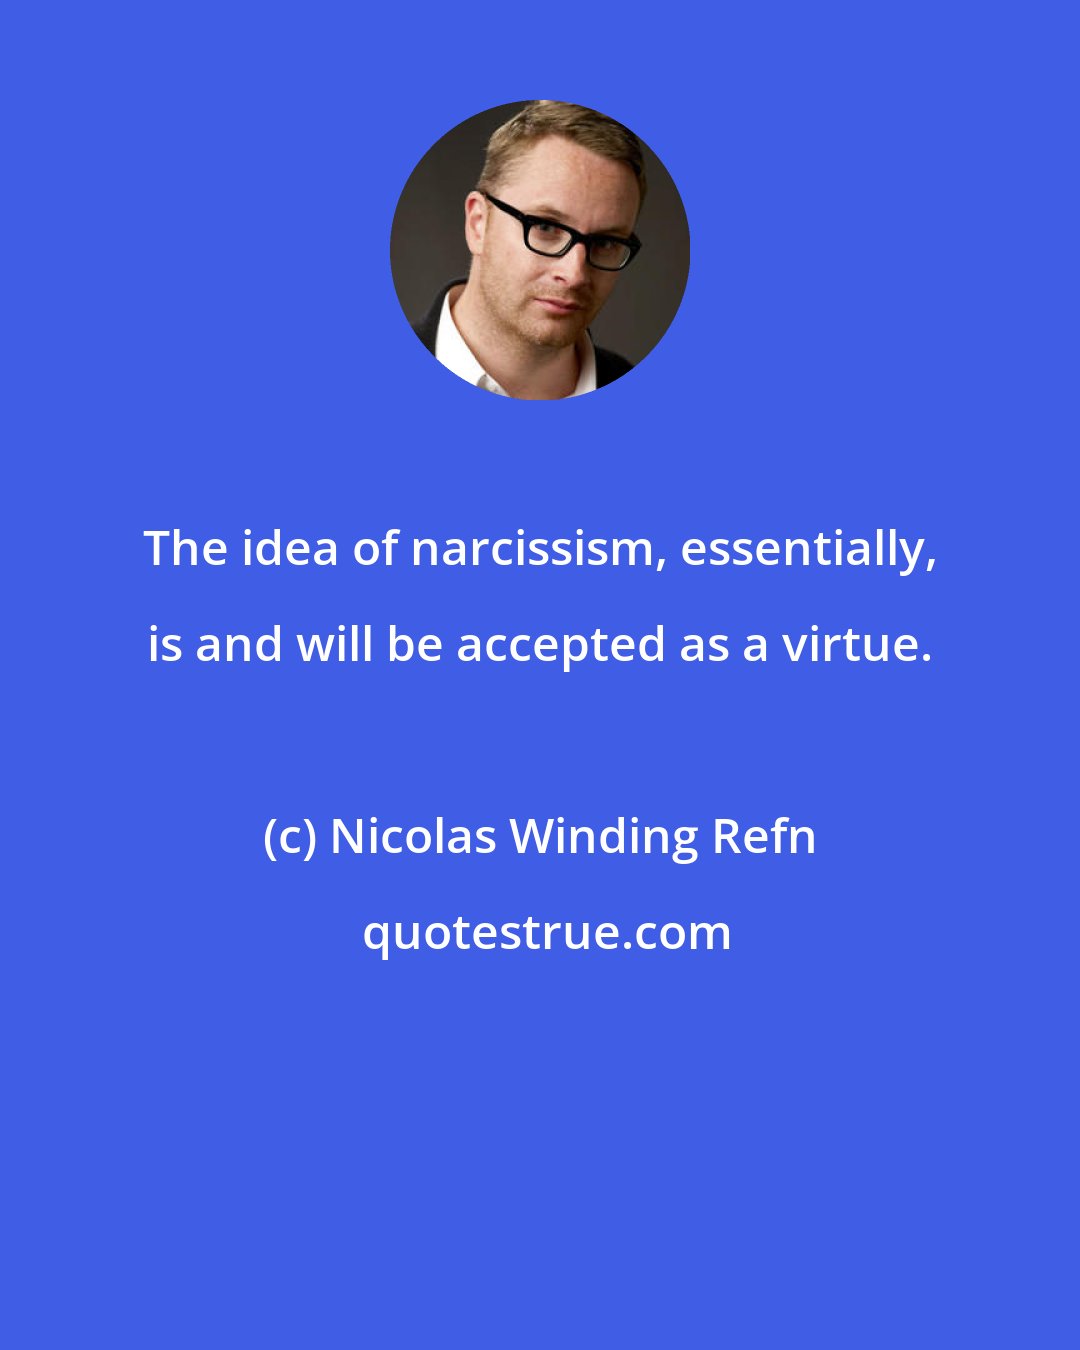 Nicolas Winding Refn: The idea of narcissism, essentially, is and will be accepted as a virtue.